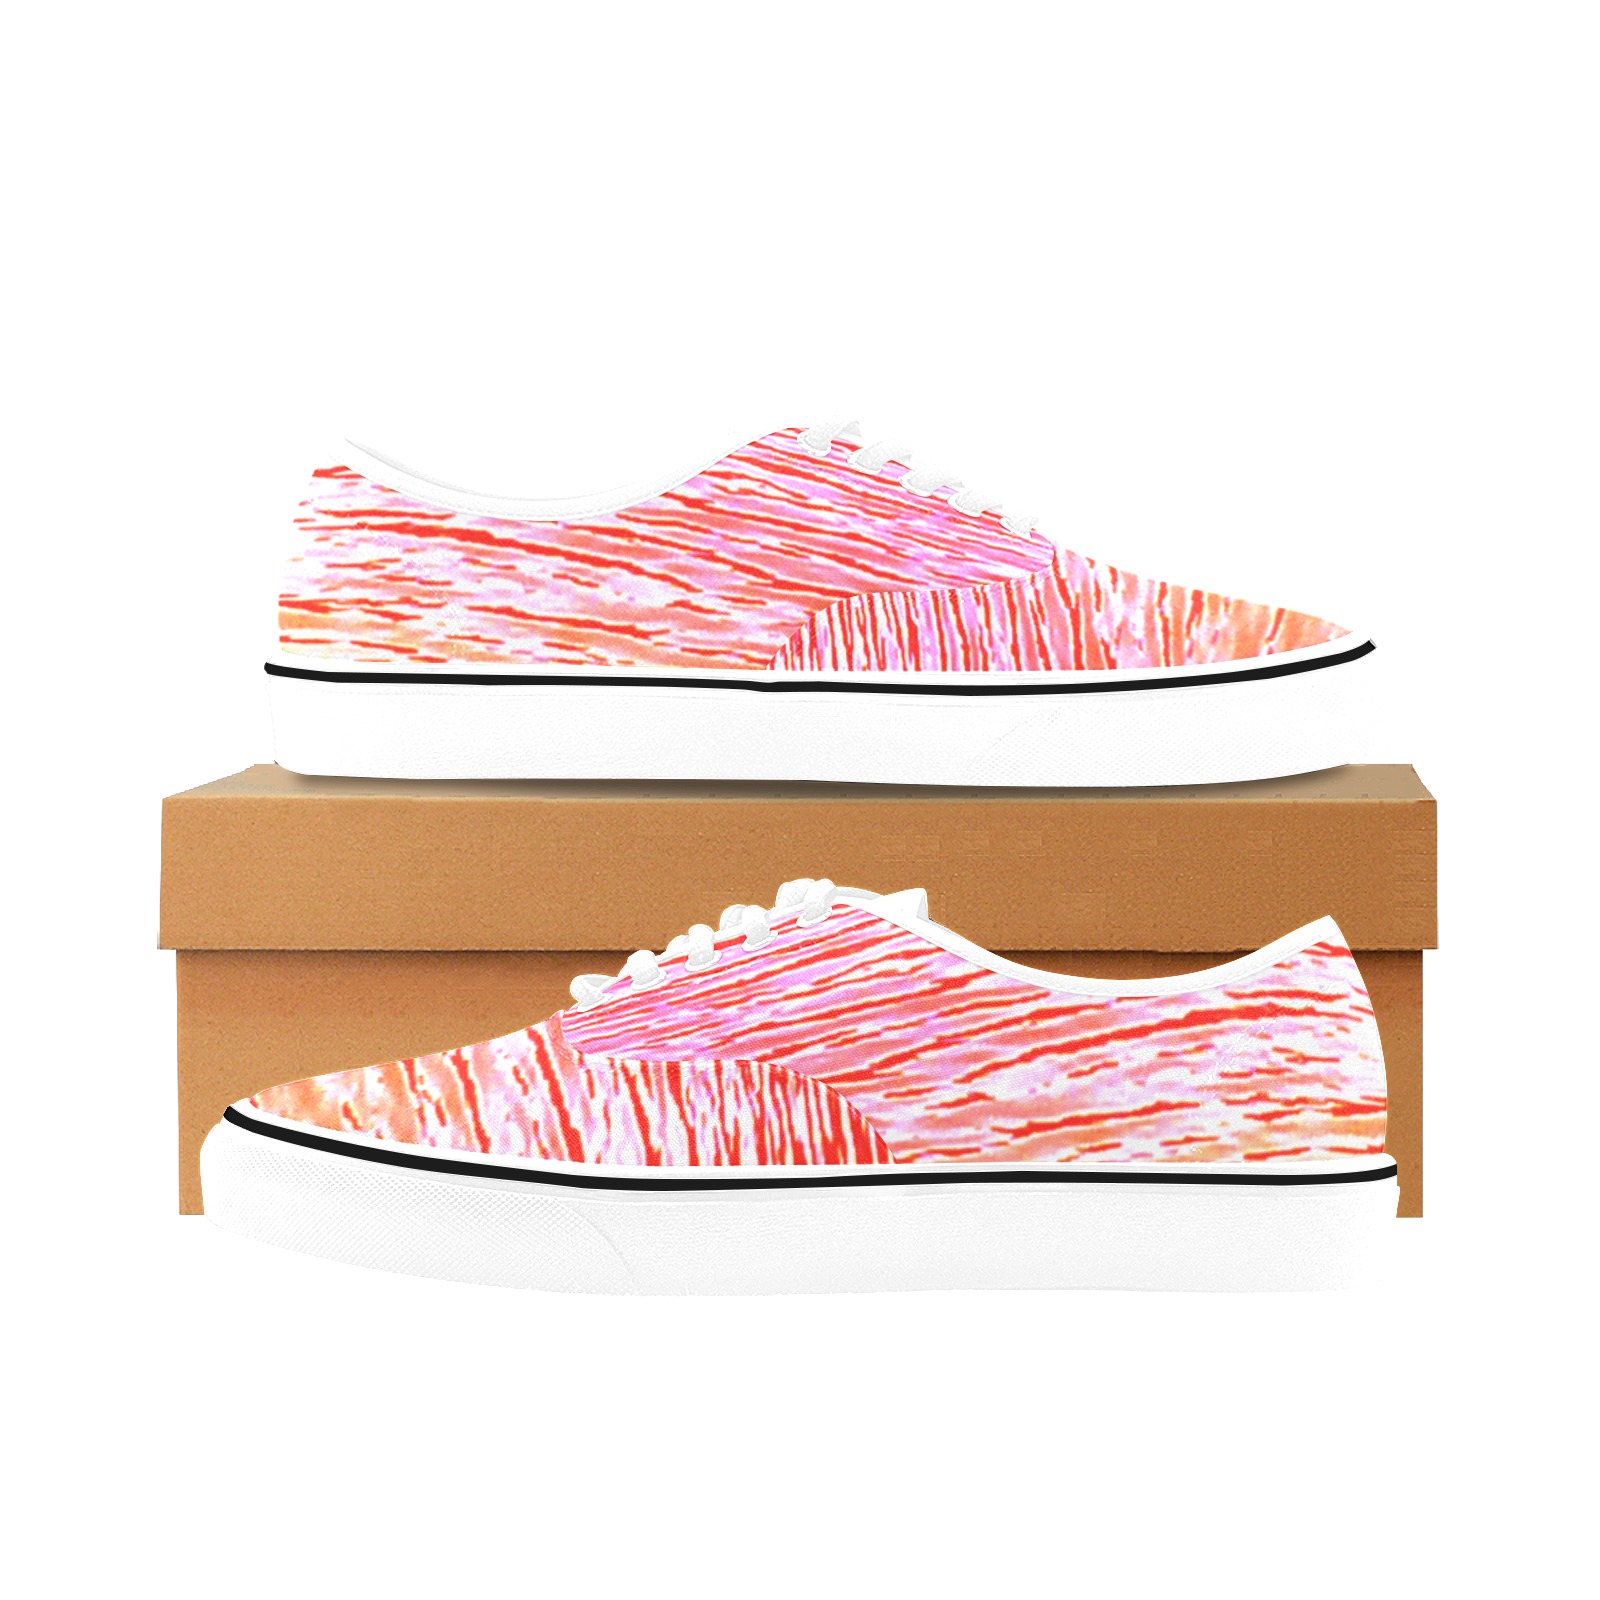 Orange and red water Classic Women's Canvas Low Top Shoes (Model E001-4)